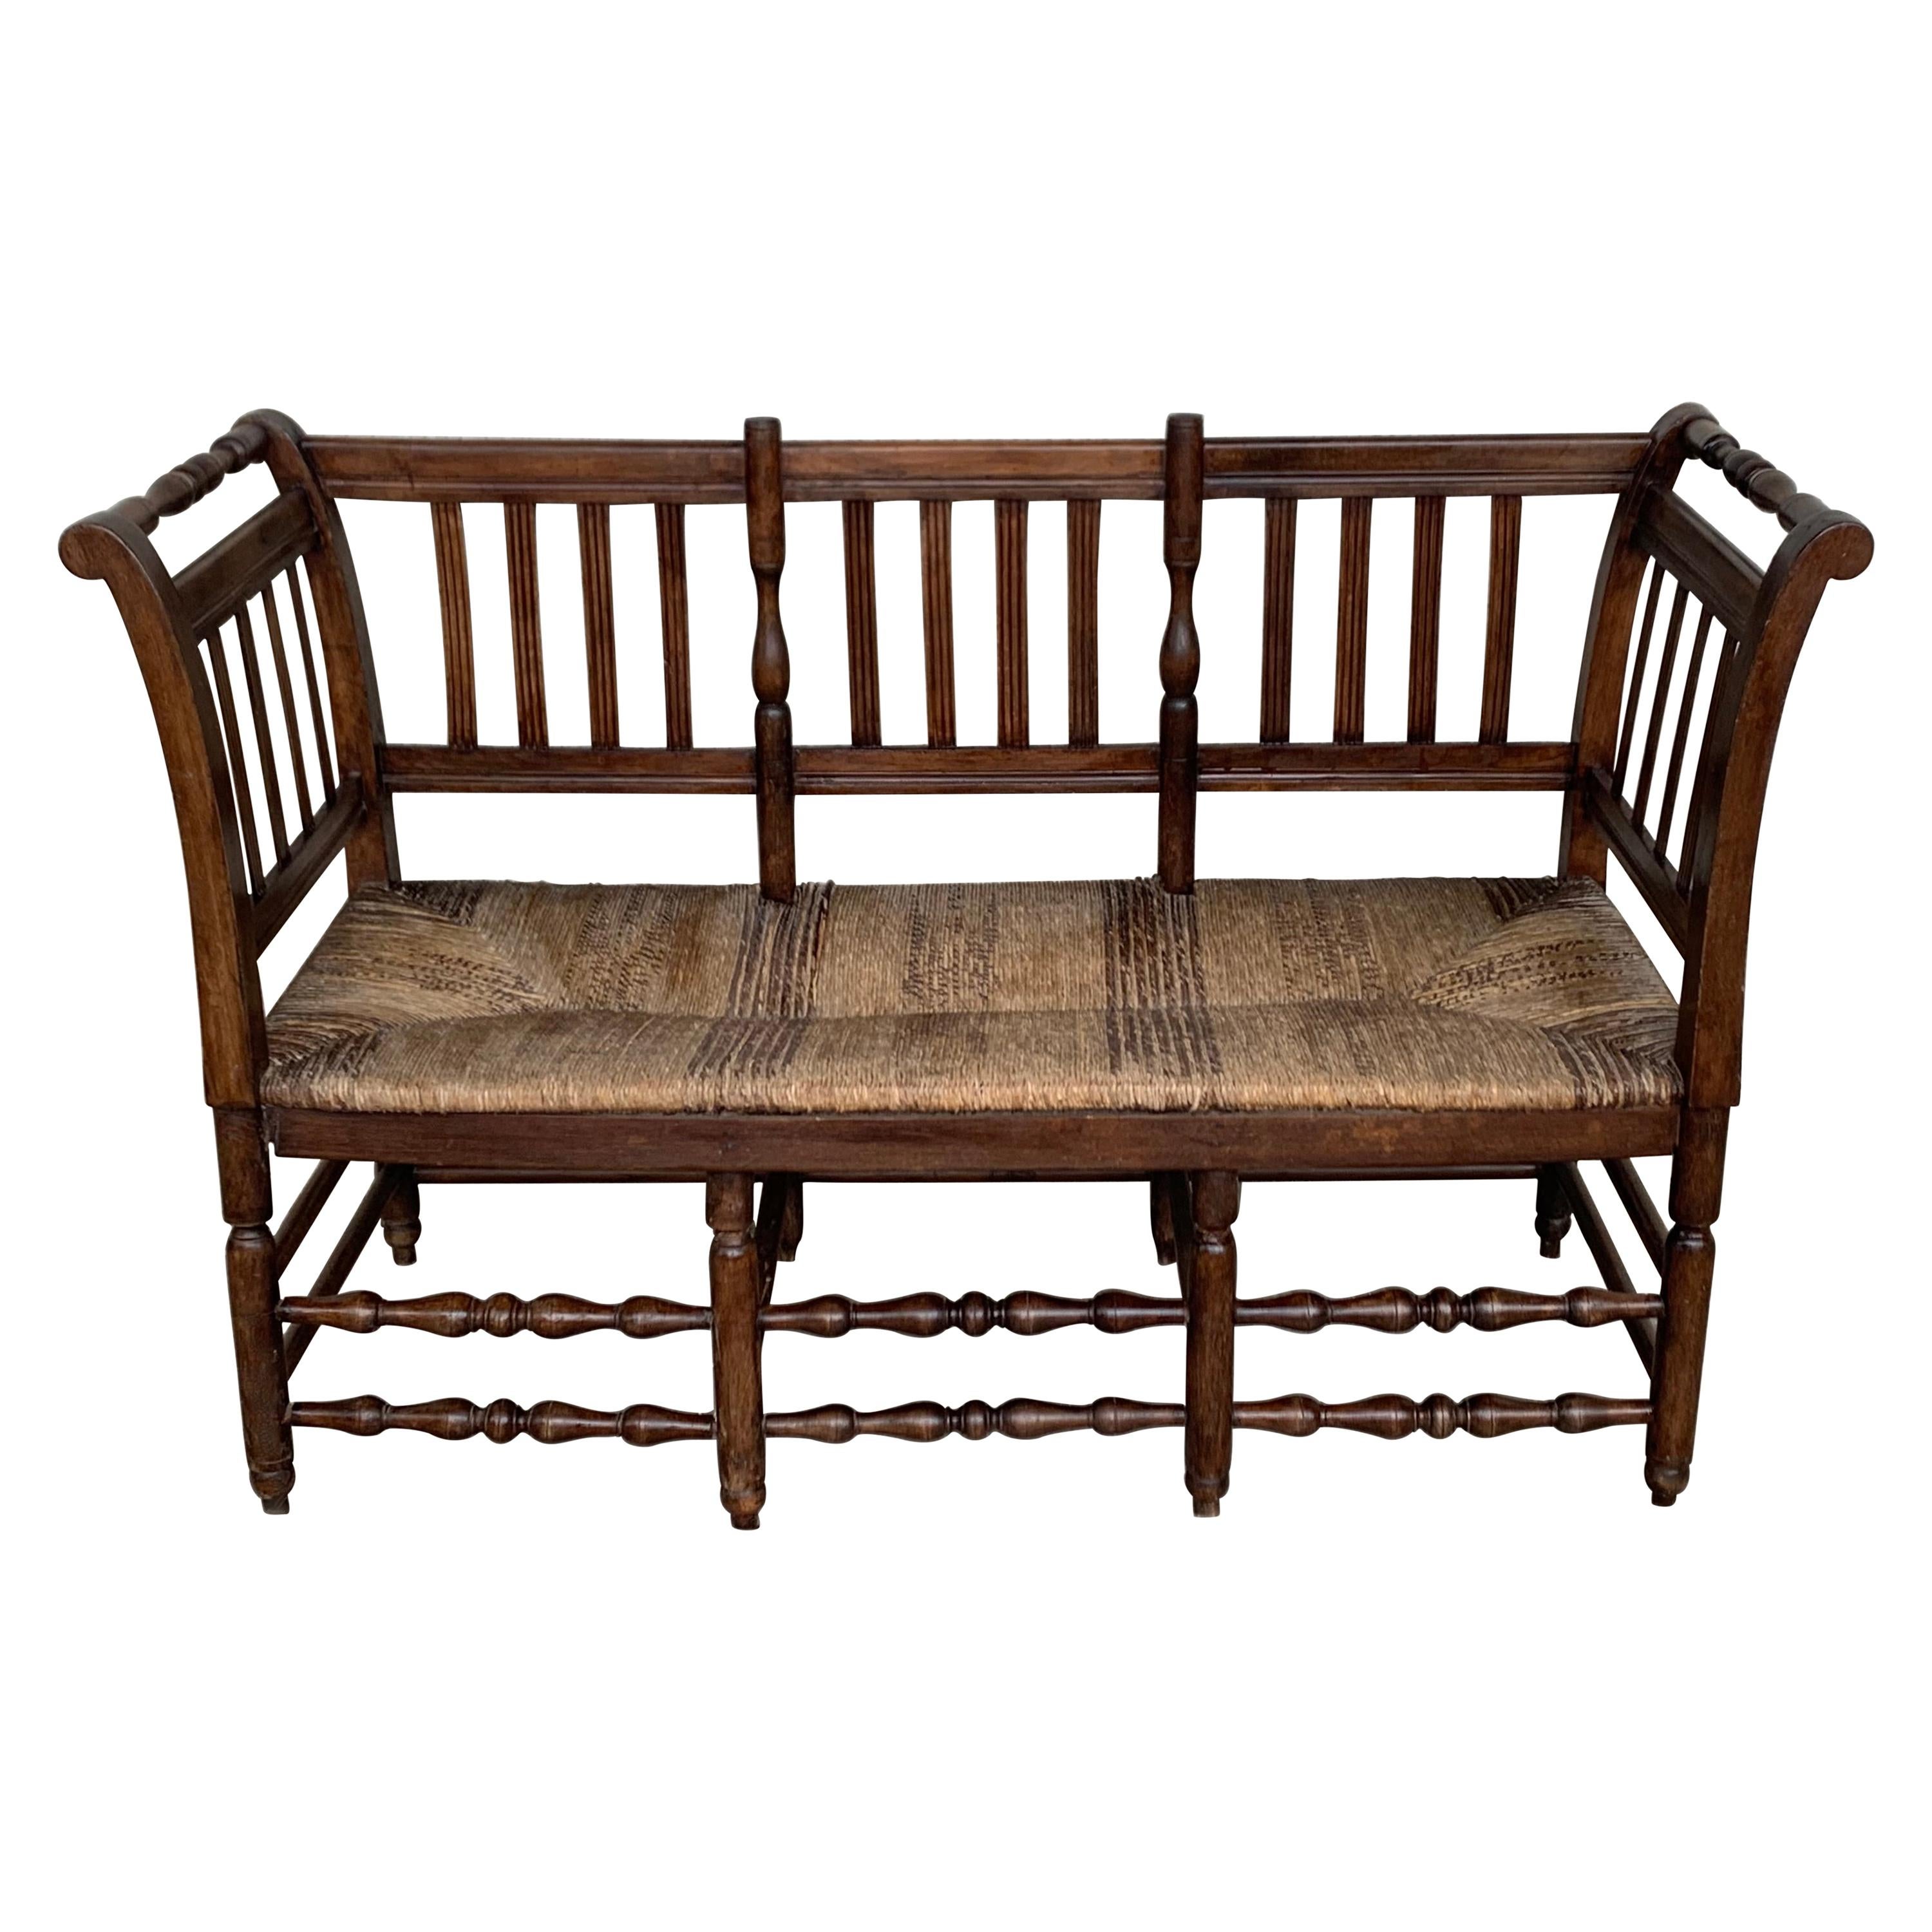 20th Century Catalan Bench in Walnut with Caned Seat